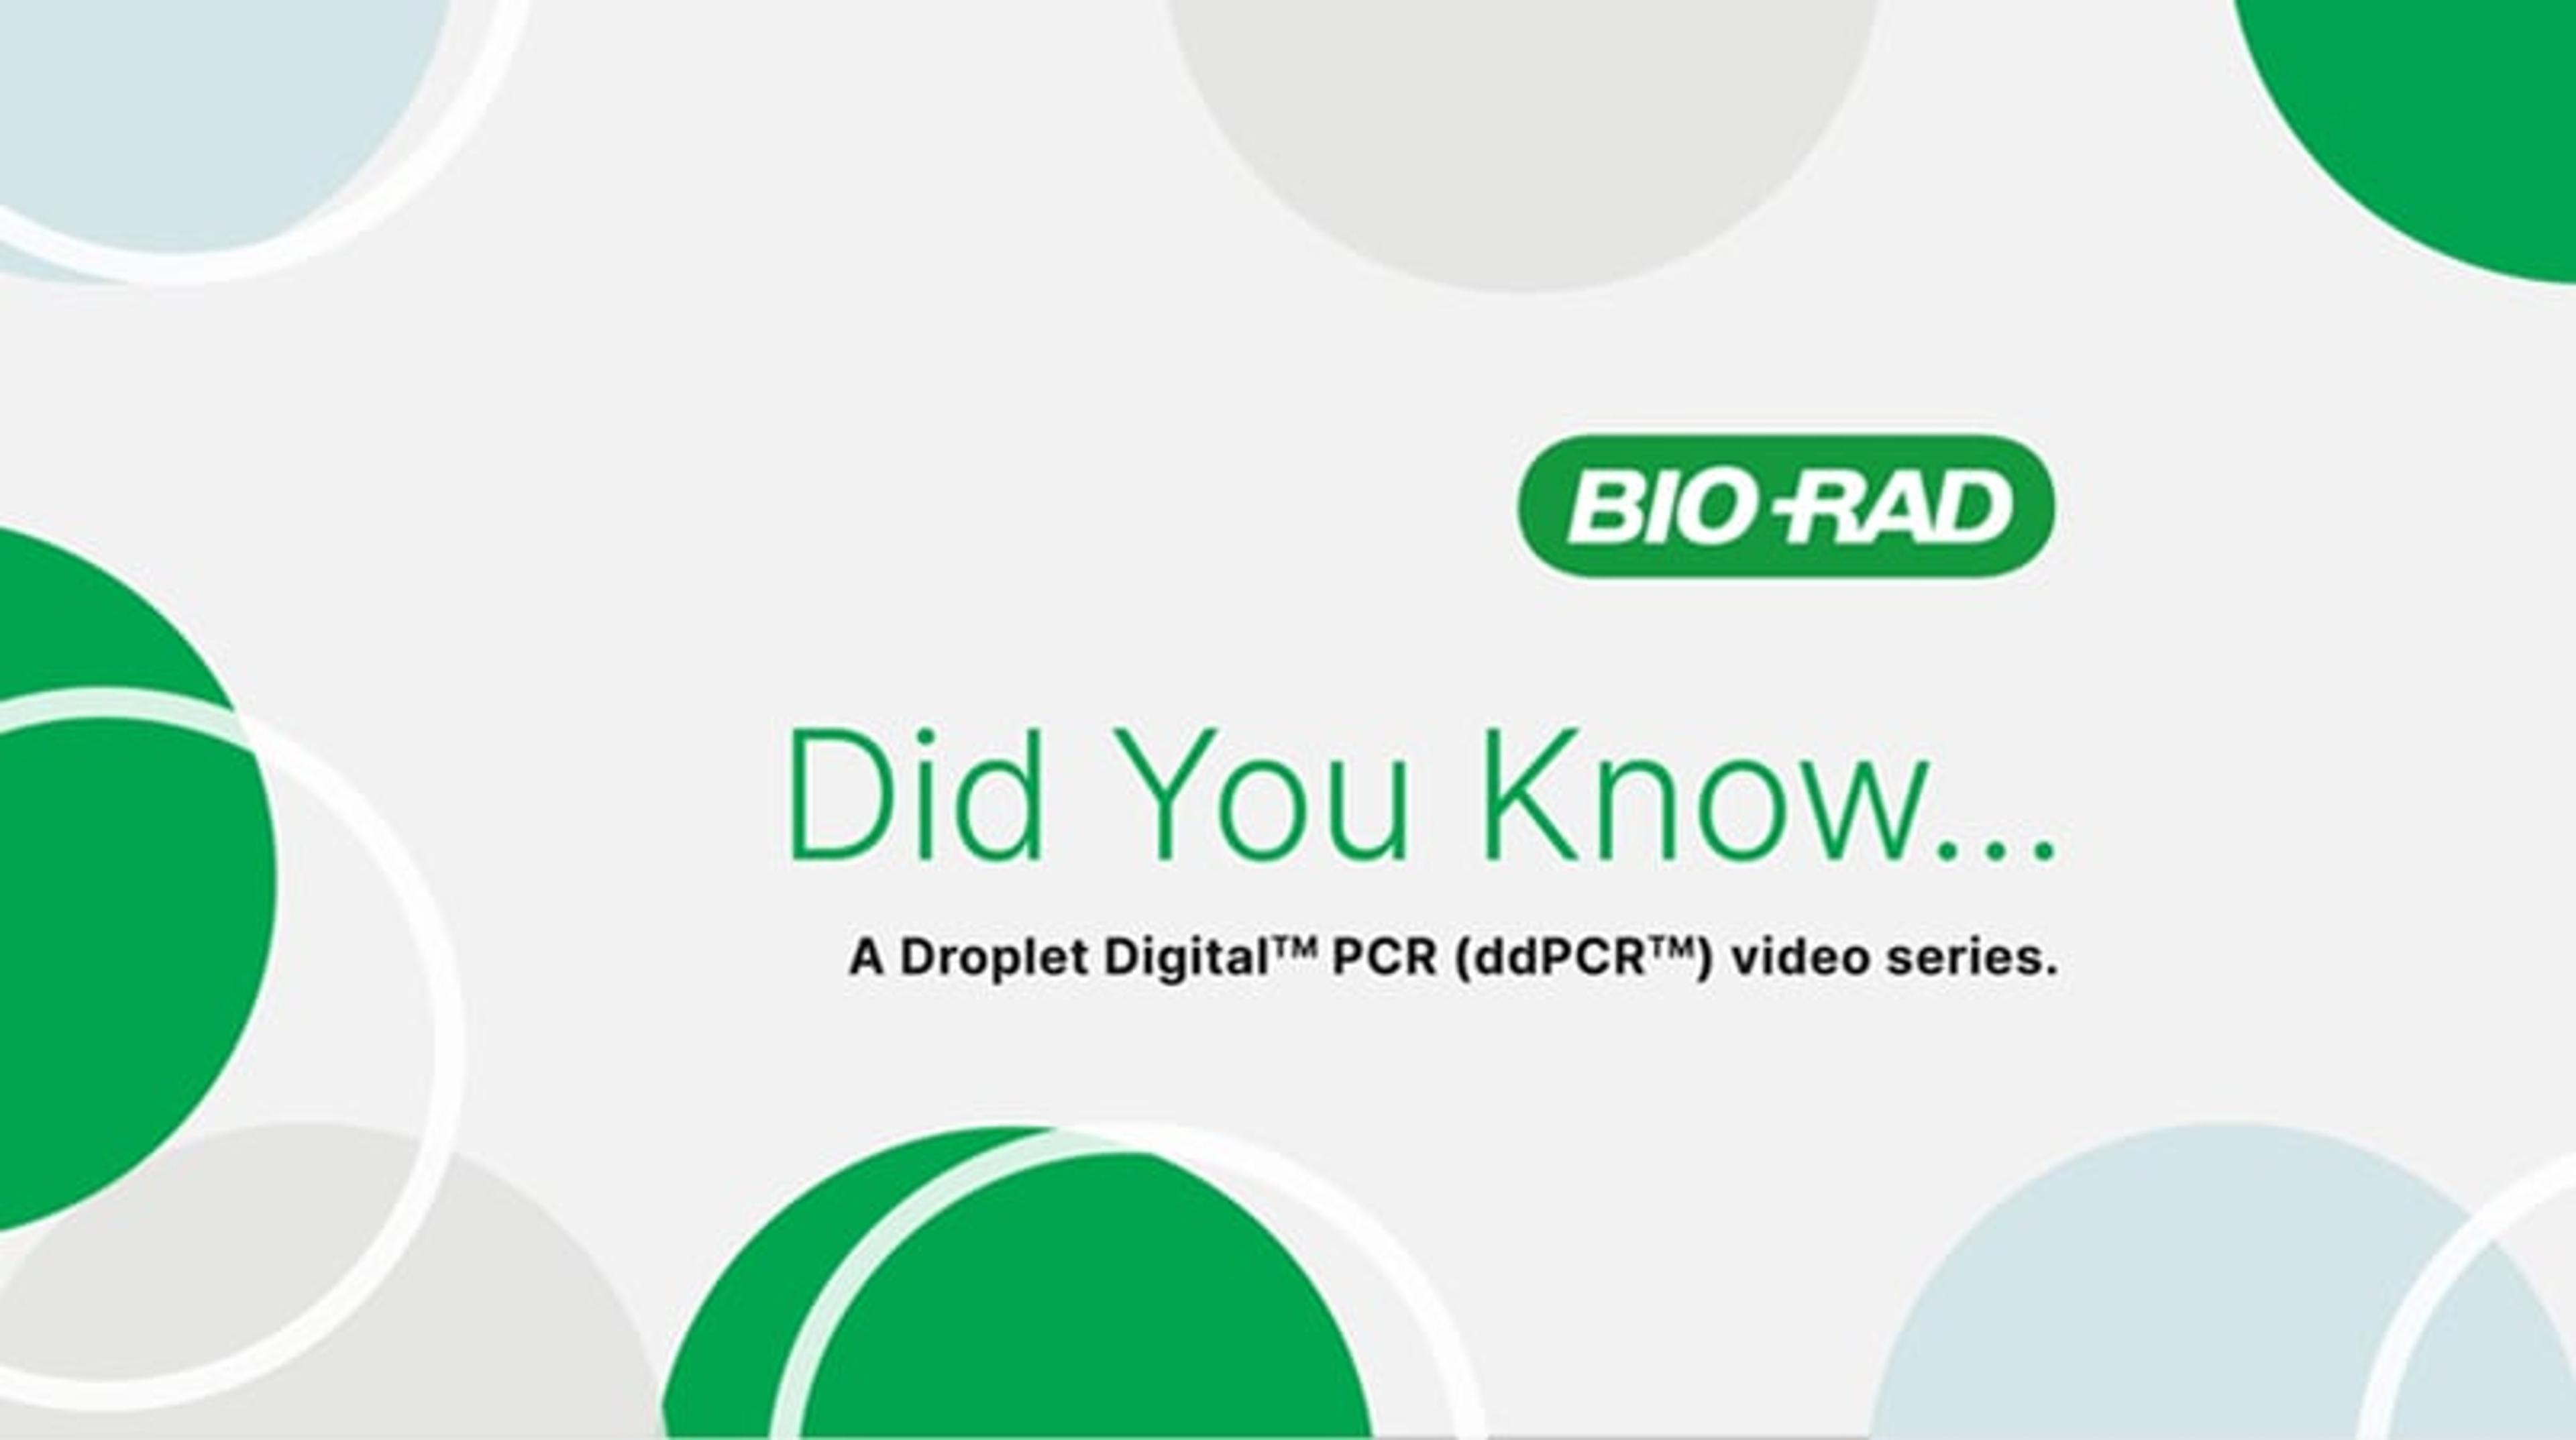 Did you know... A Droplet Digital PCR (ddPCR) video series